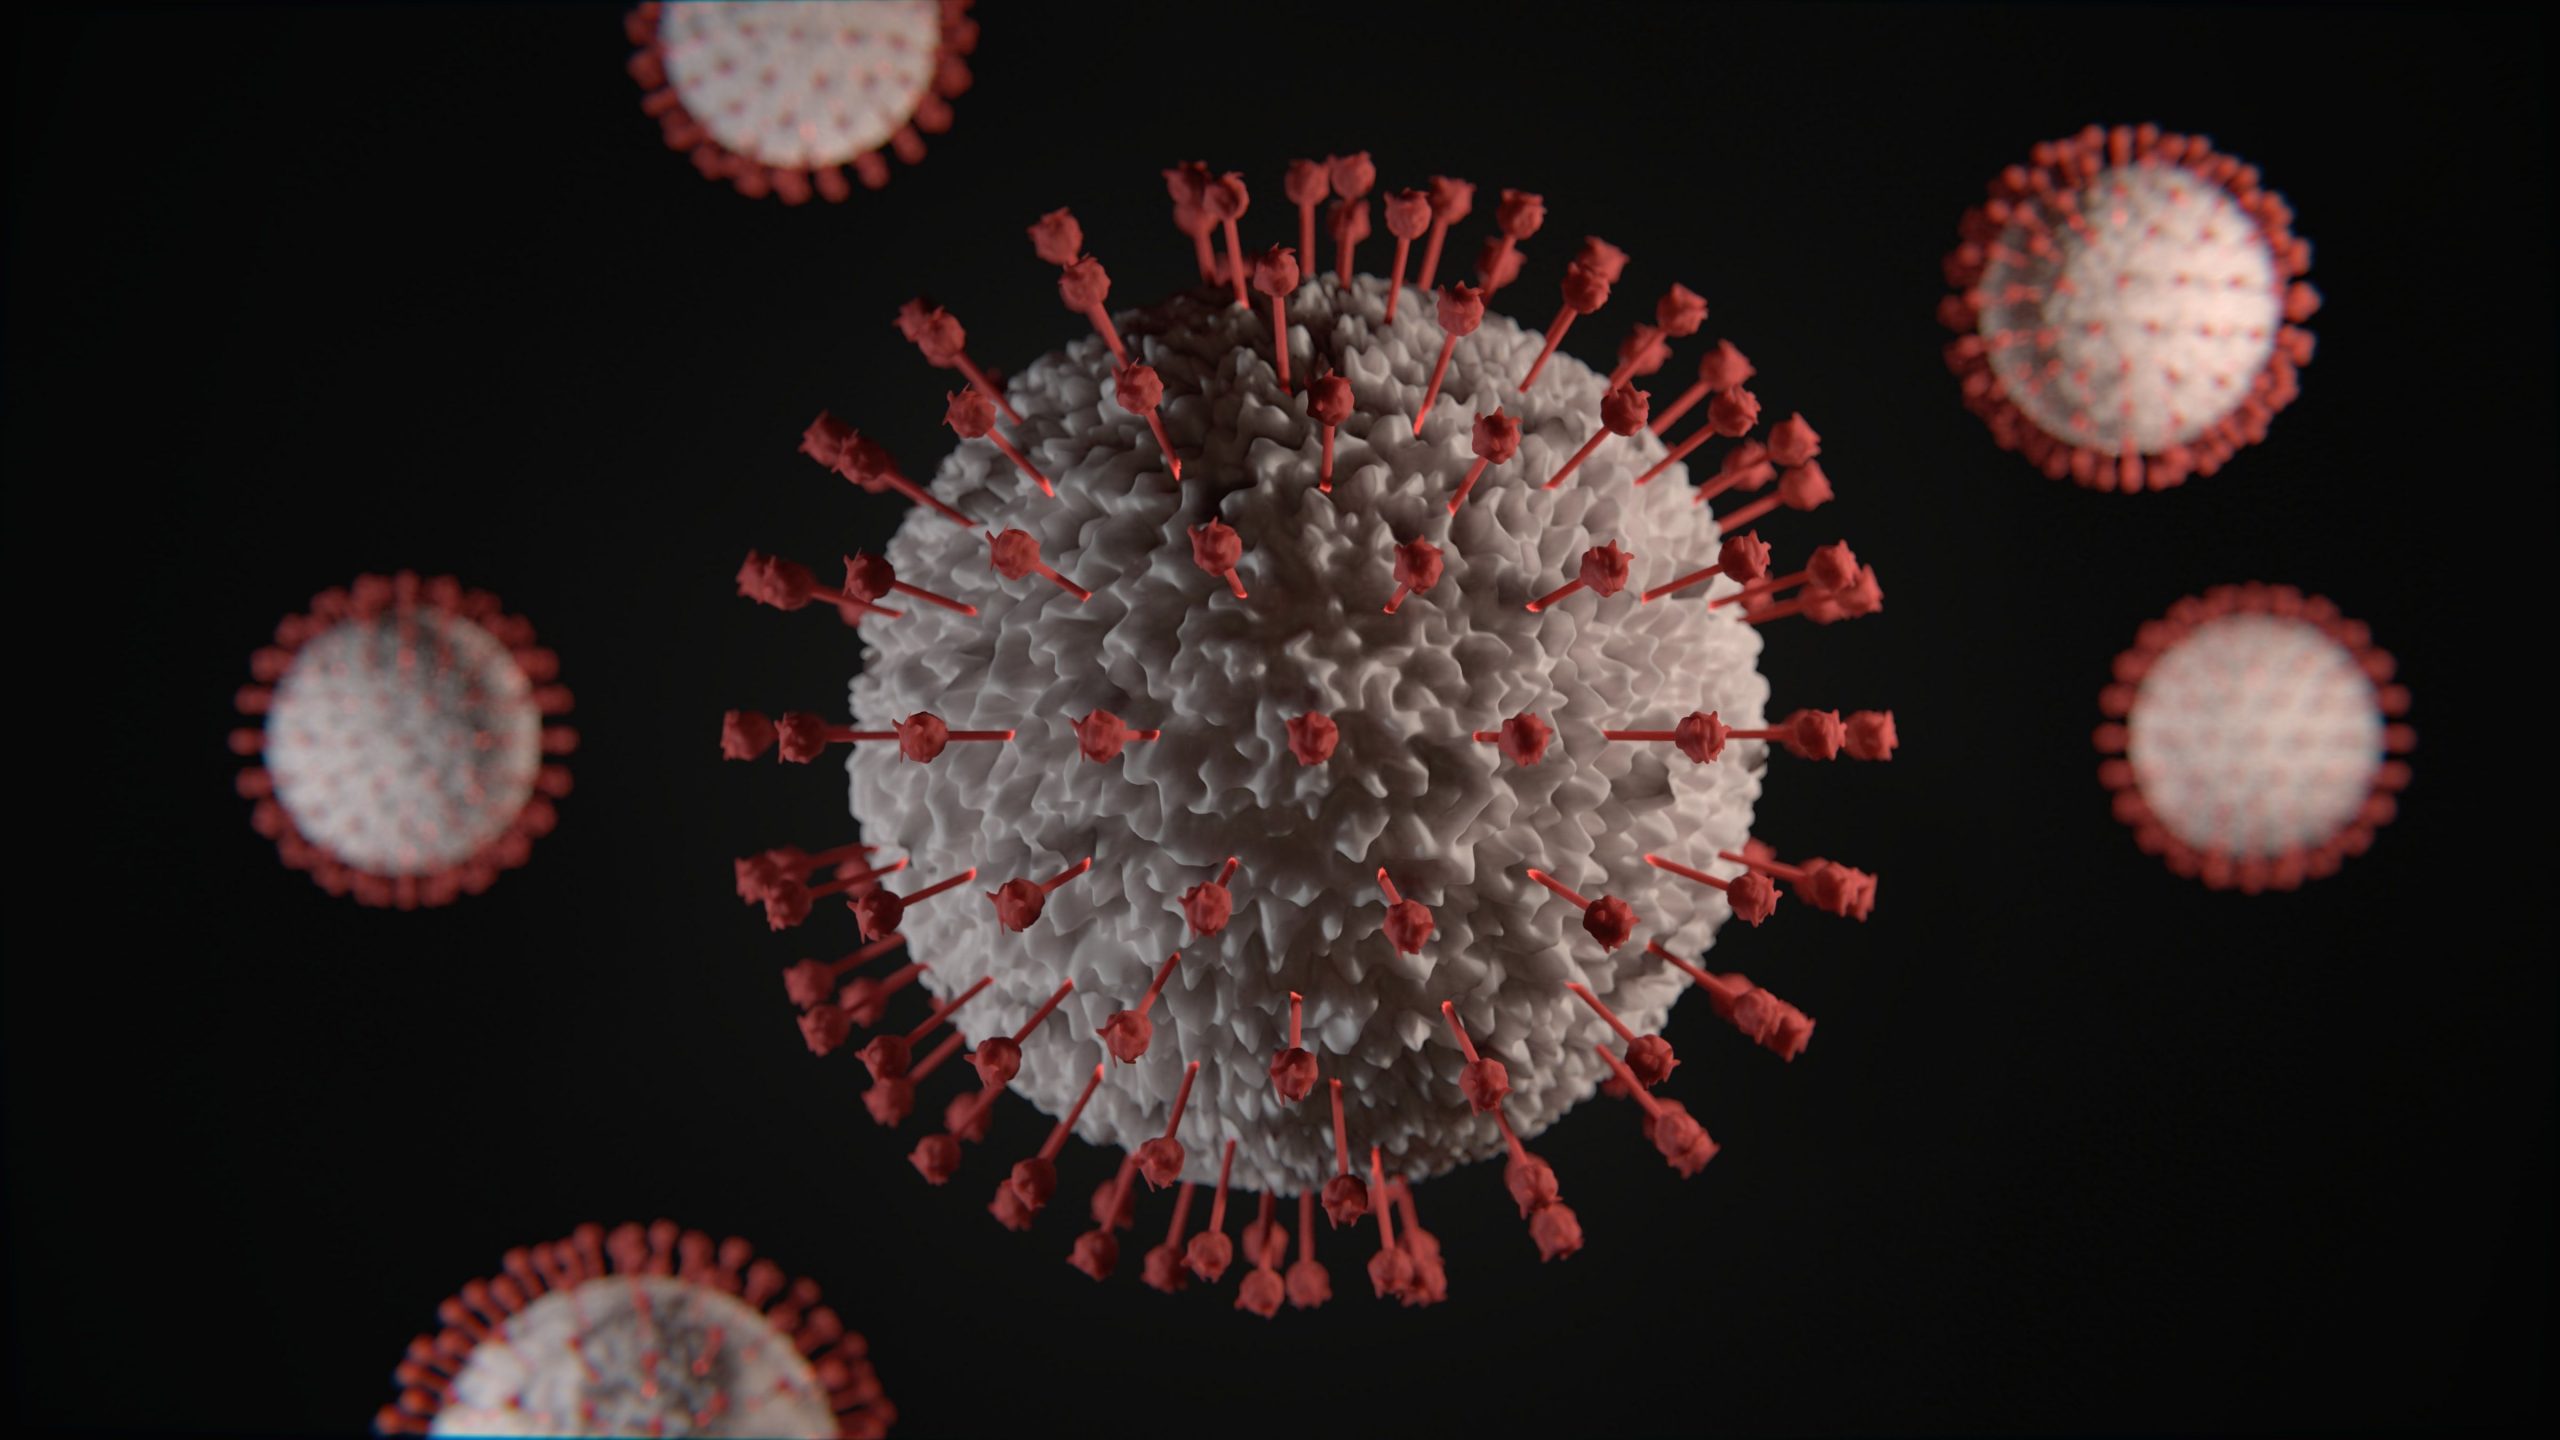 Explained: Can new variants of the coronavirus keep emerging?